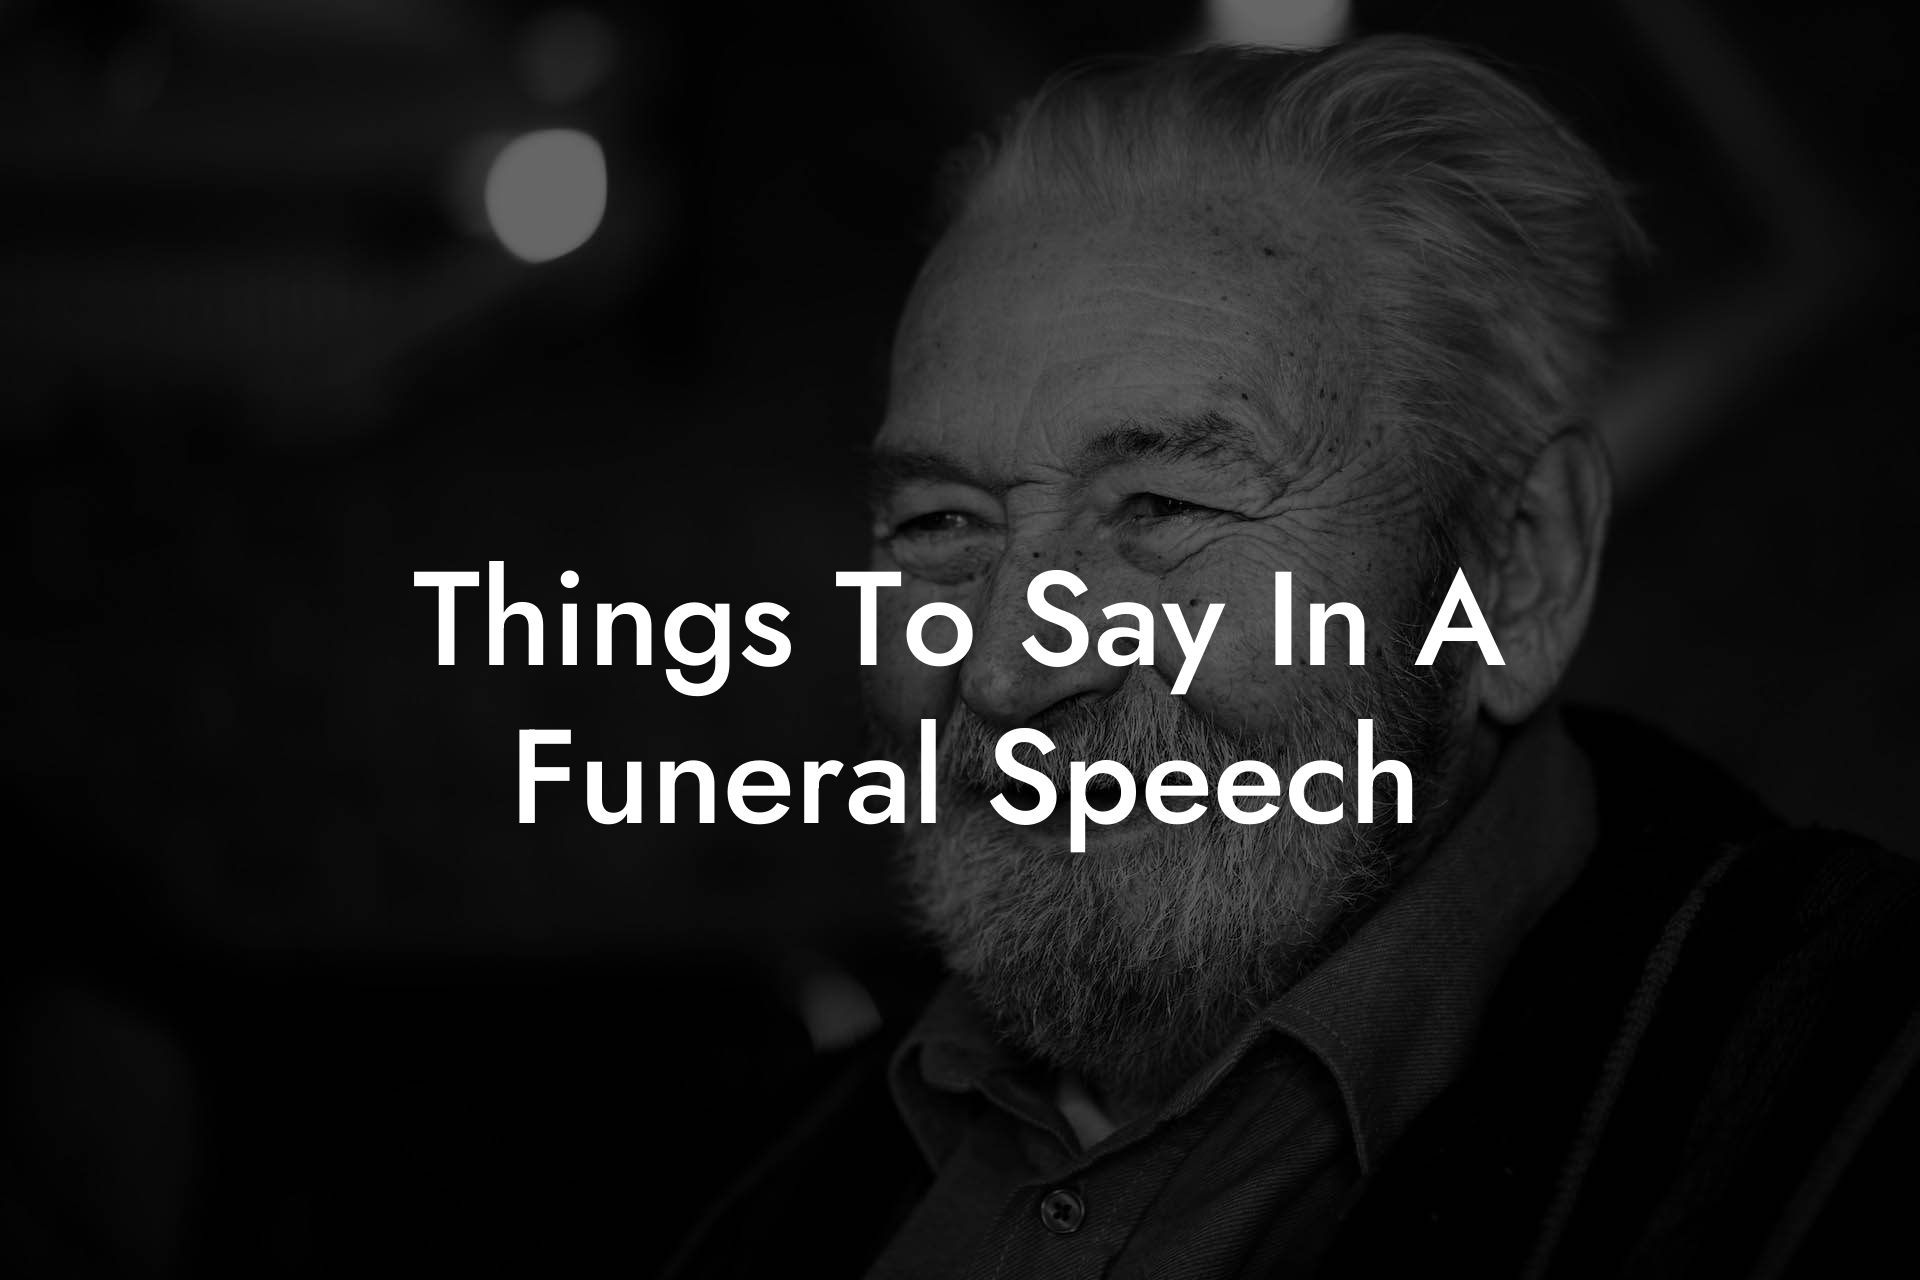 Things To Say In A Funeral Speech